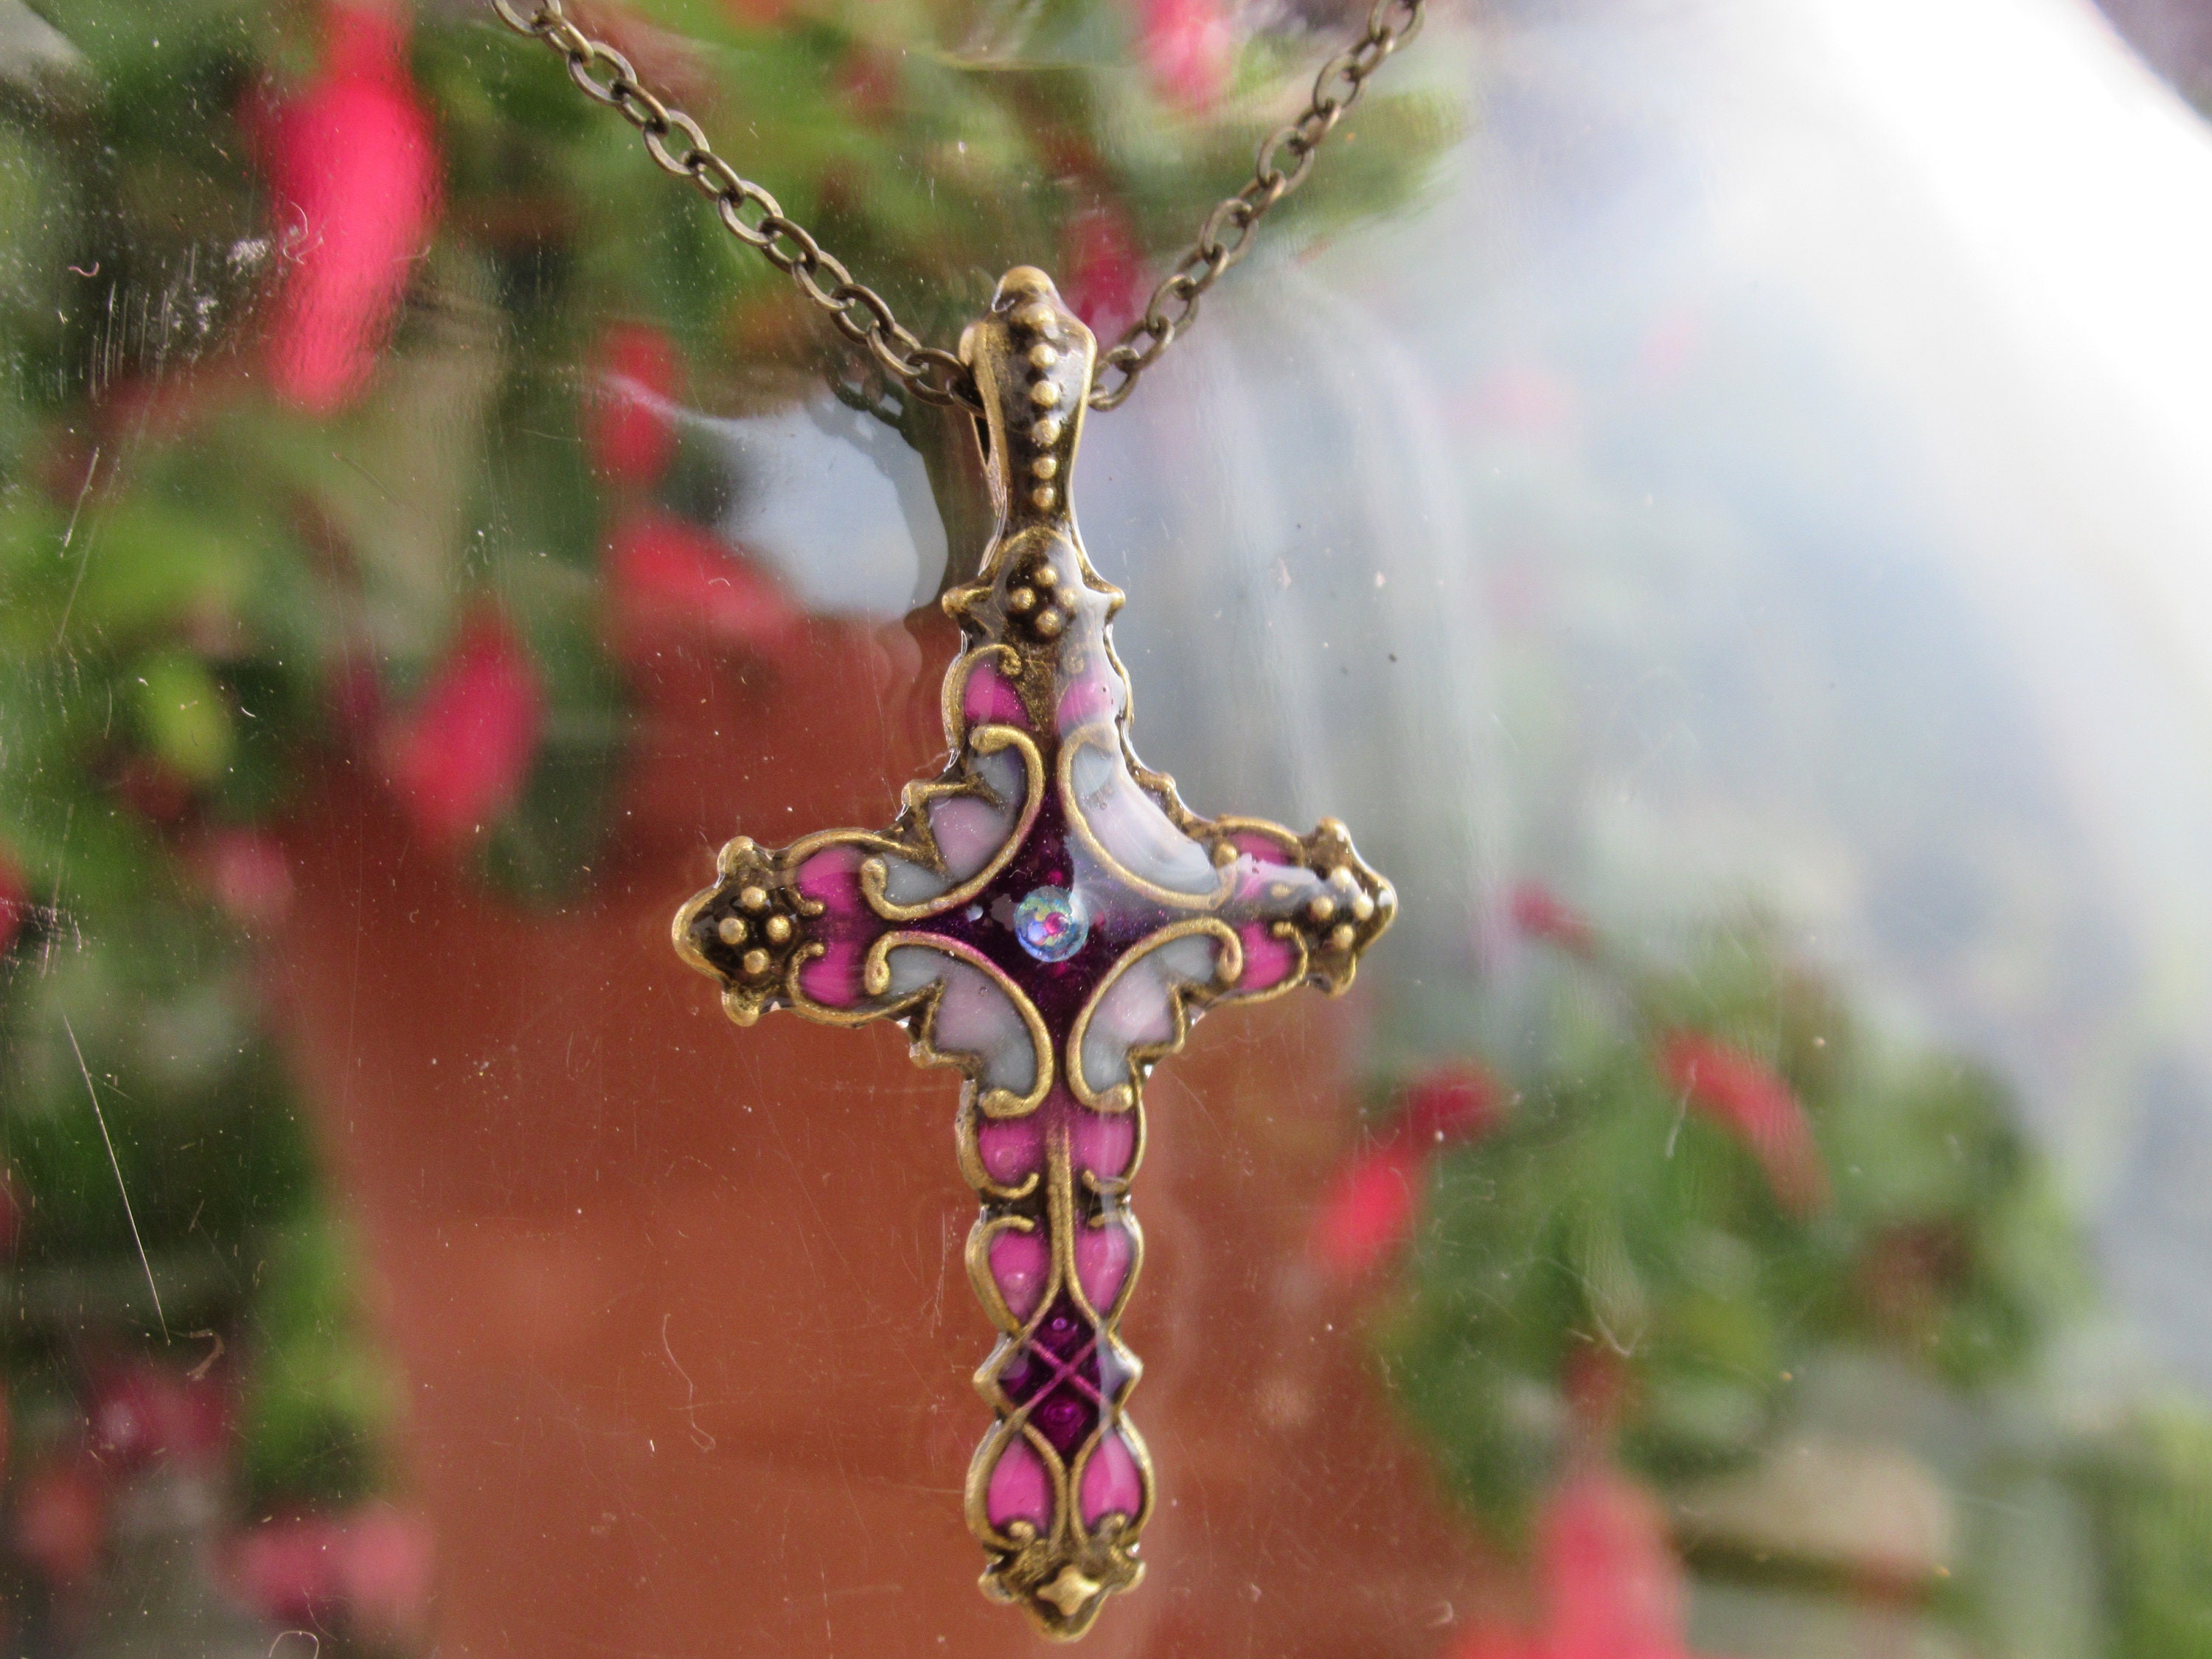 020 Stained Glass Ornate Cross Pendant Antique Gold